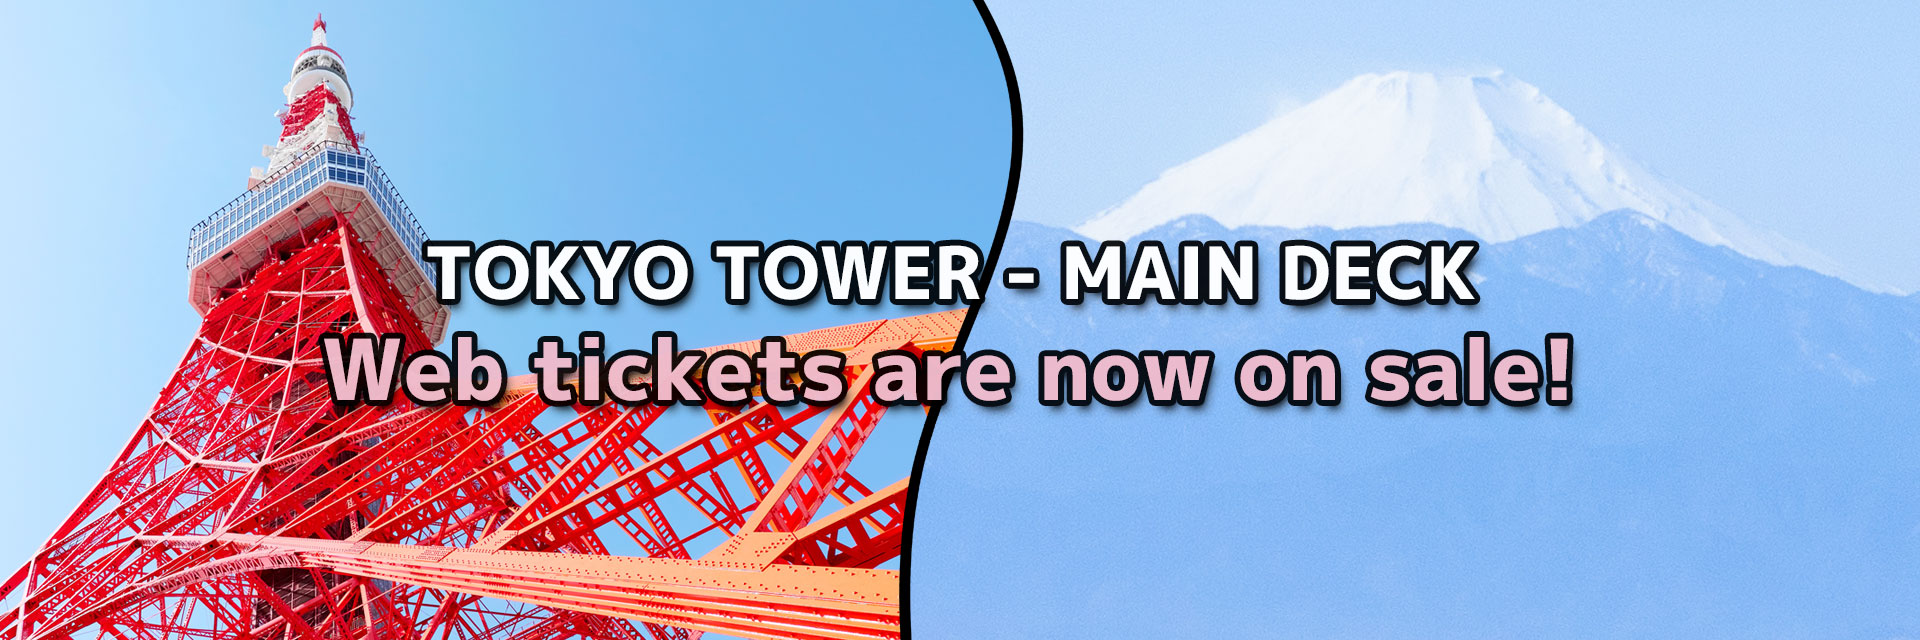 MAIN DECK WEB tickets are on sale!